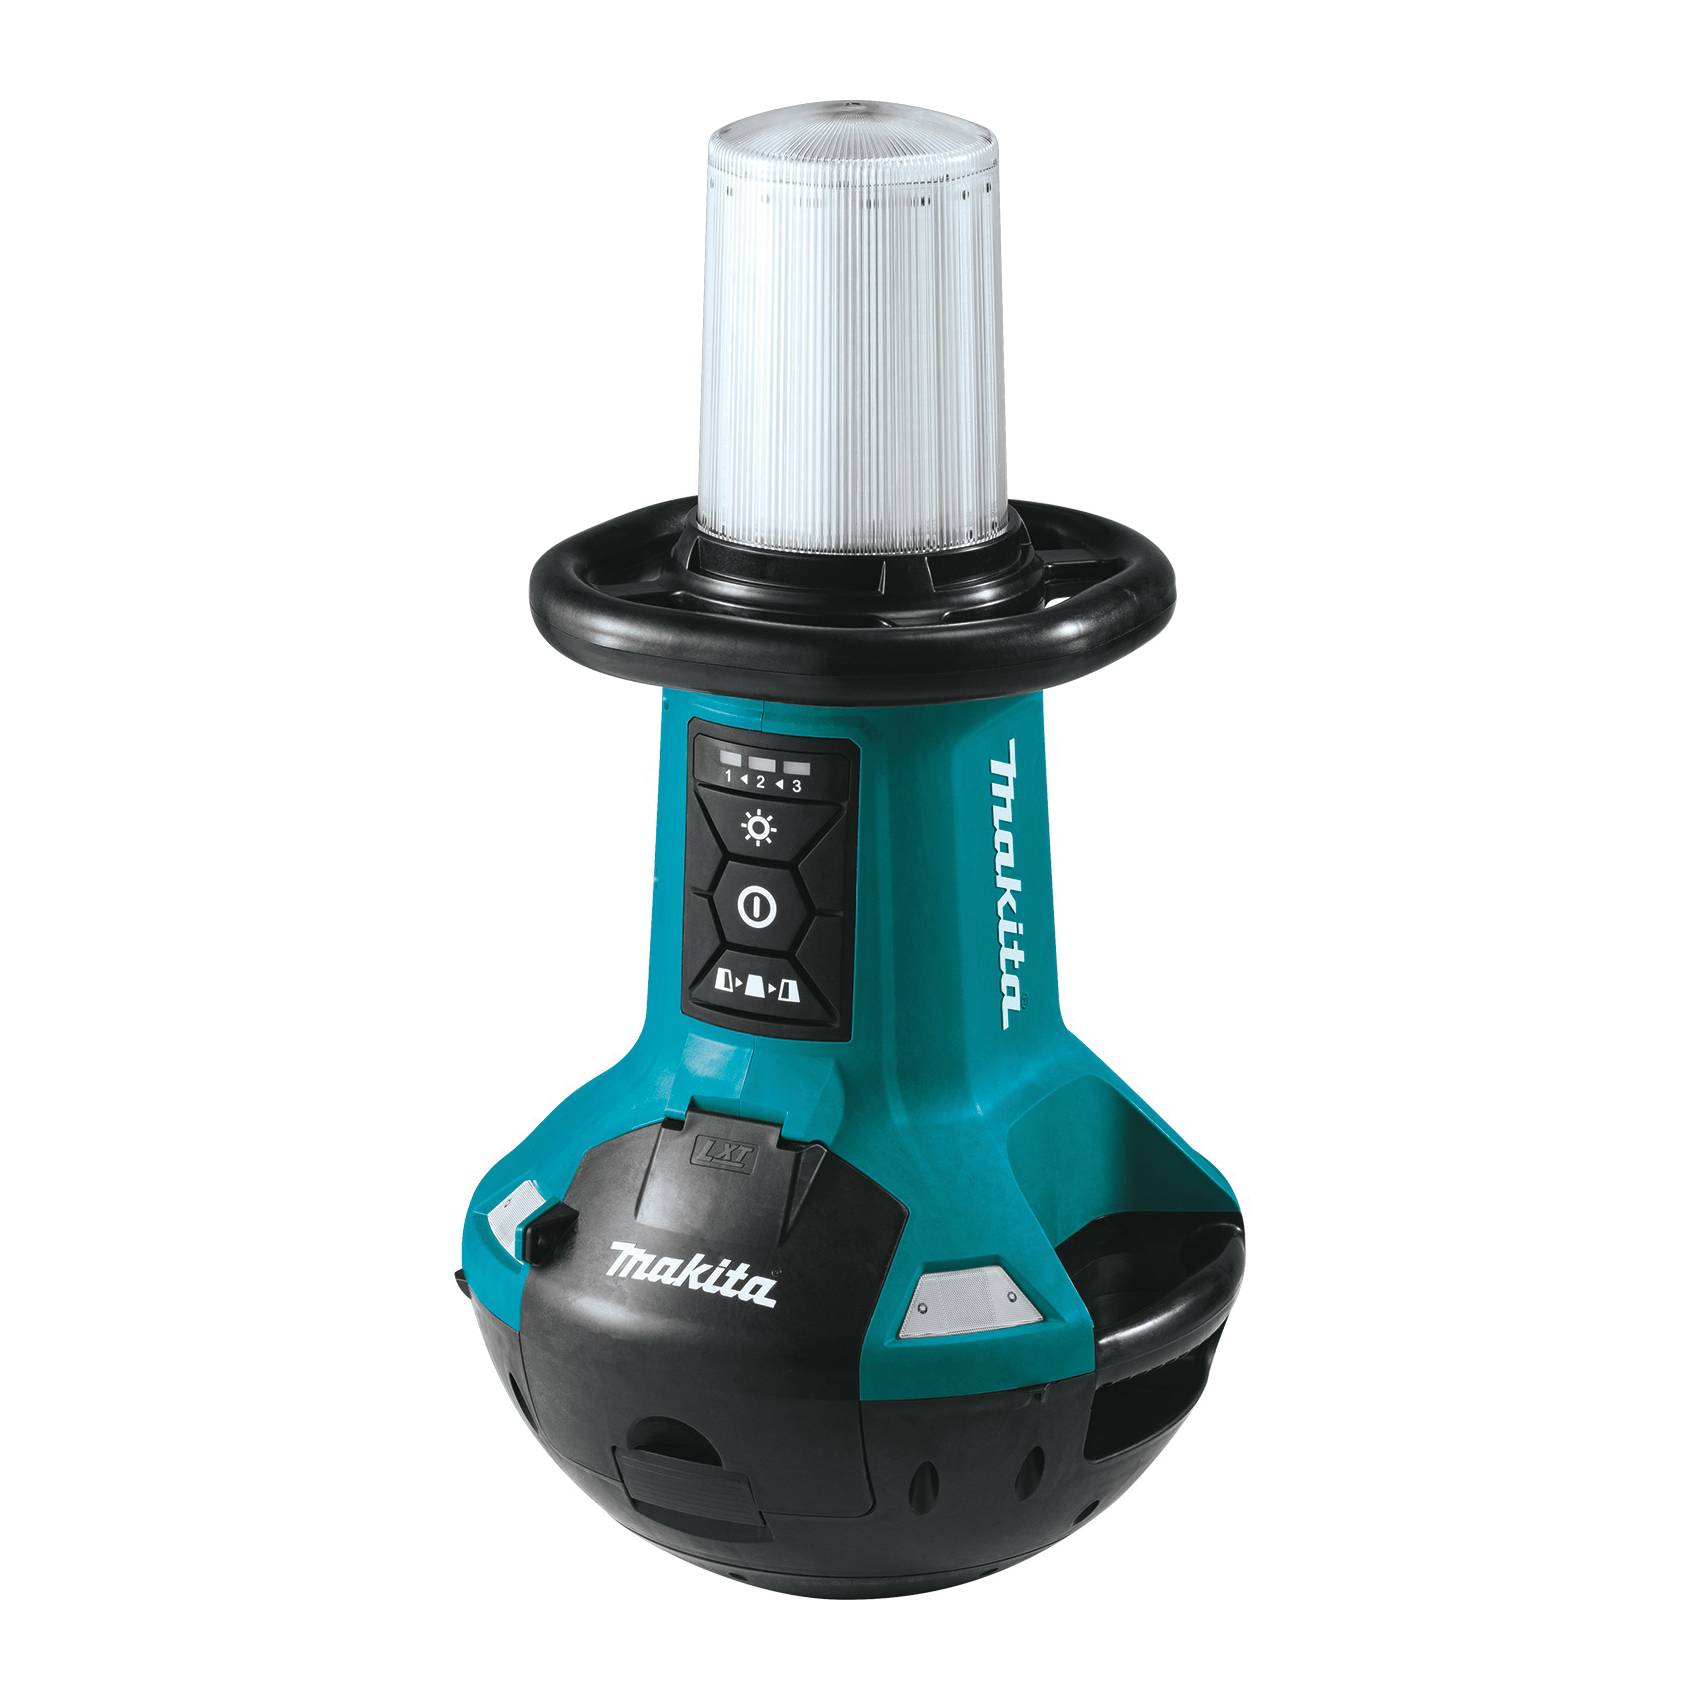 LXT Series DML810 Cordless Area Light, 18 V, Lithium-Ion Battery, 1-Lamp, LED Lamp, Teal